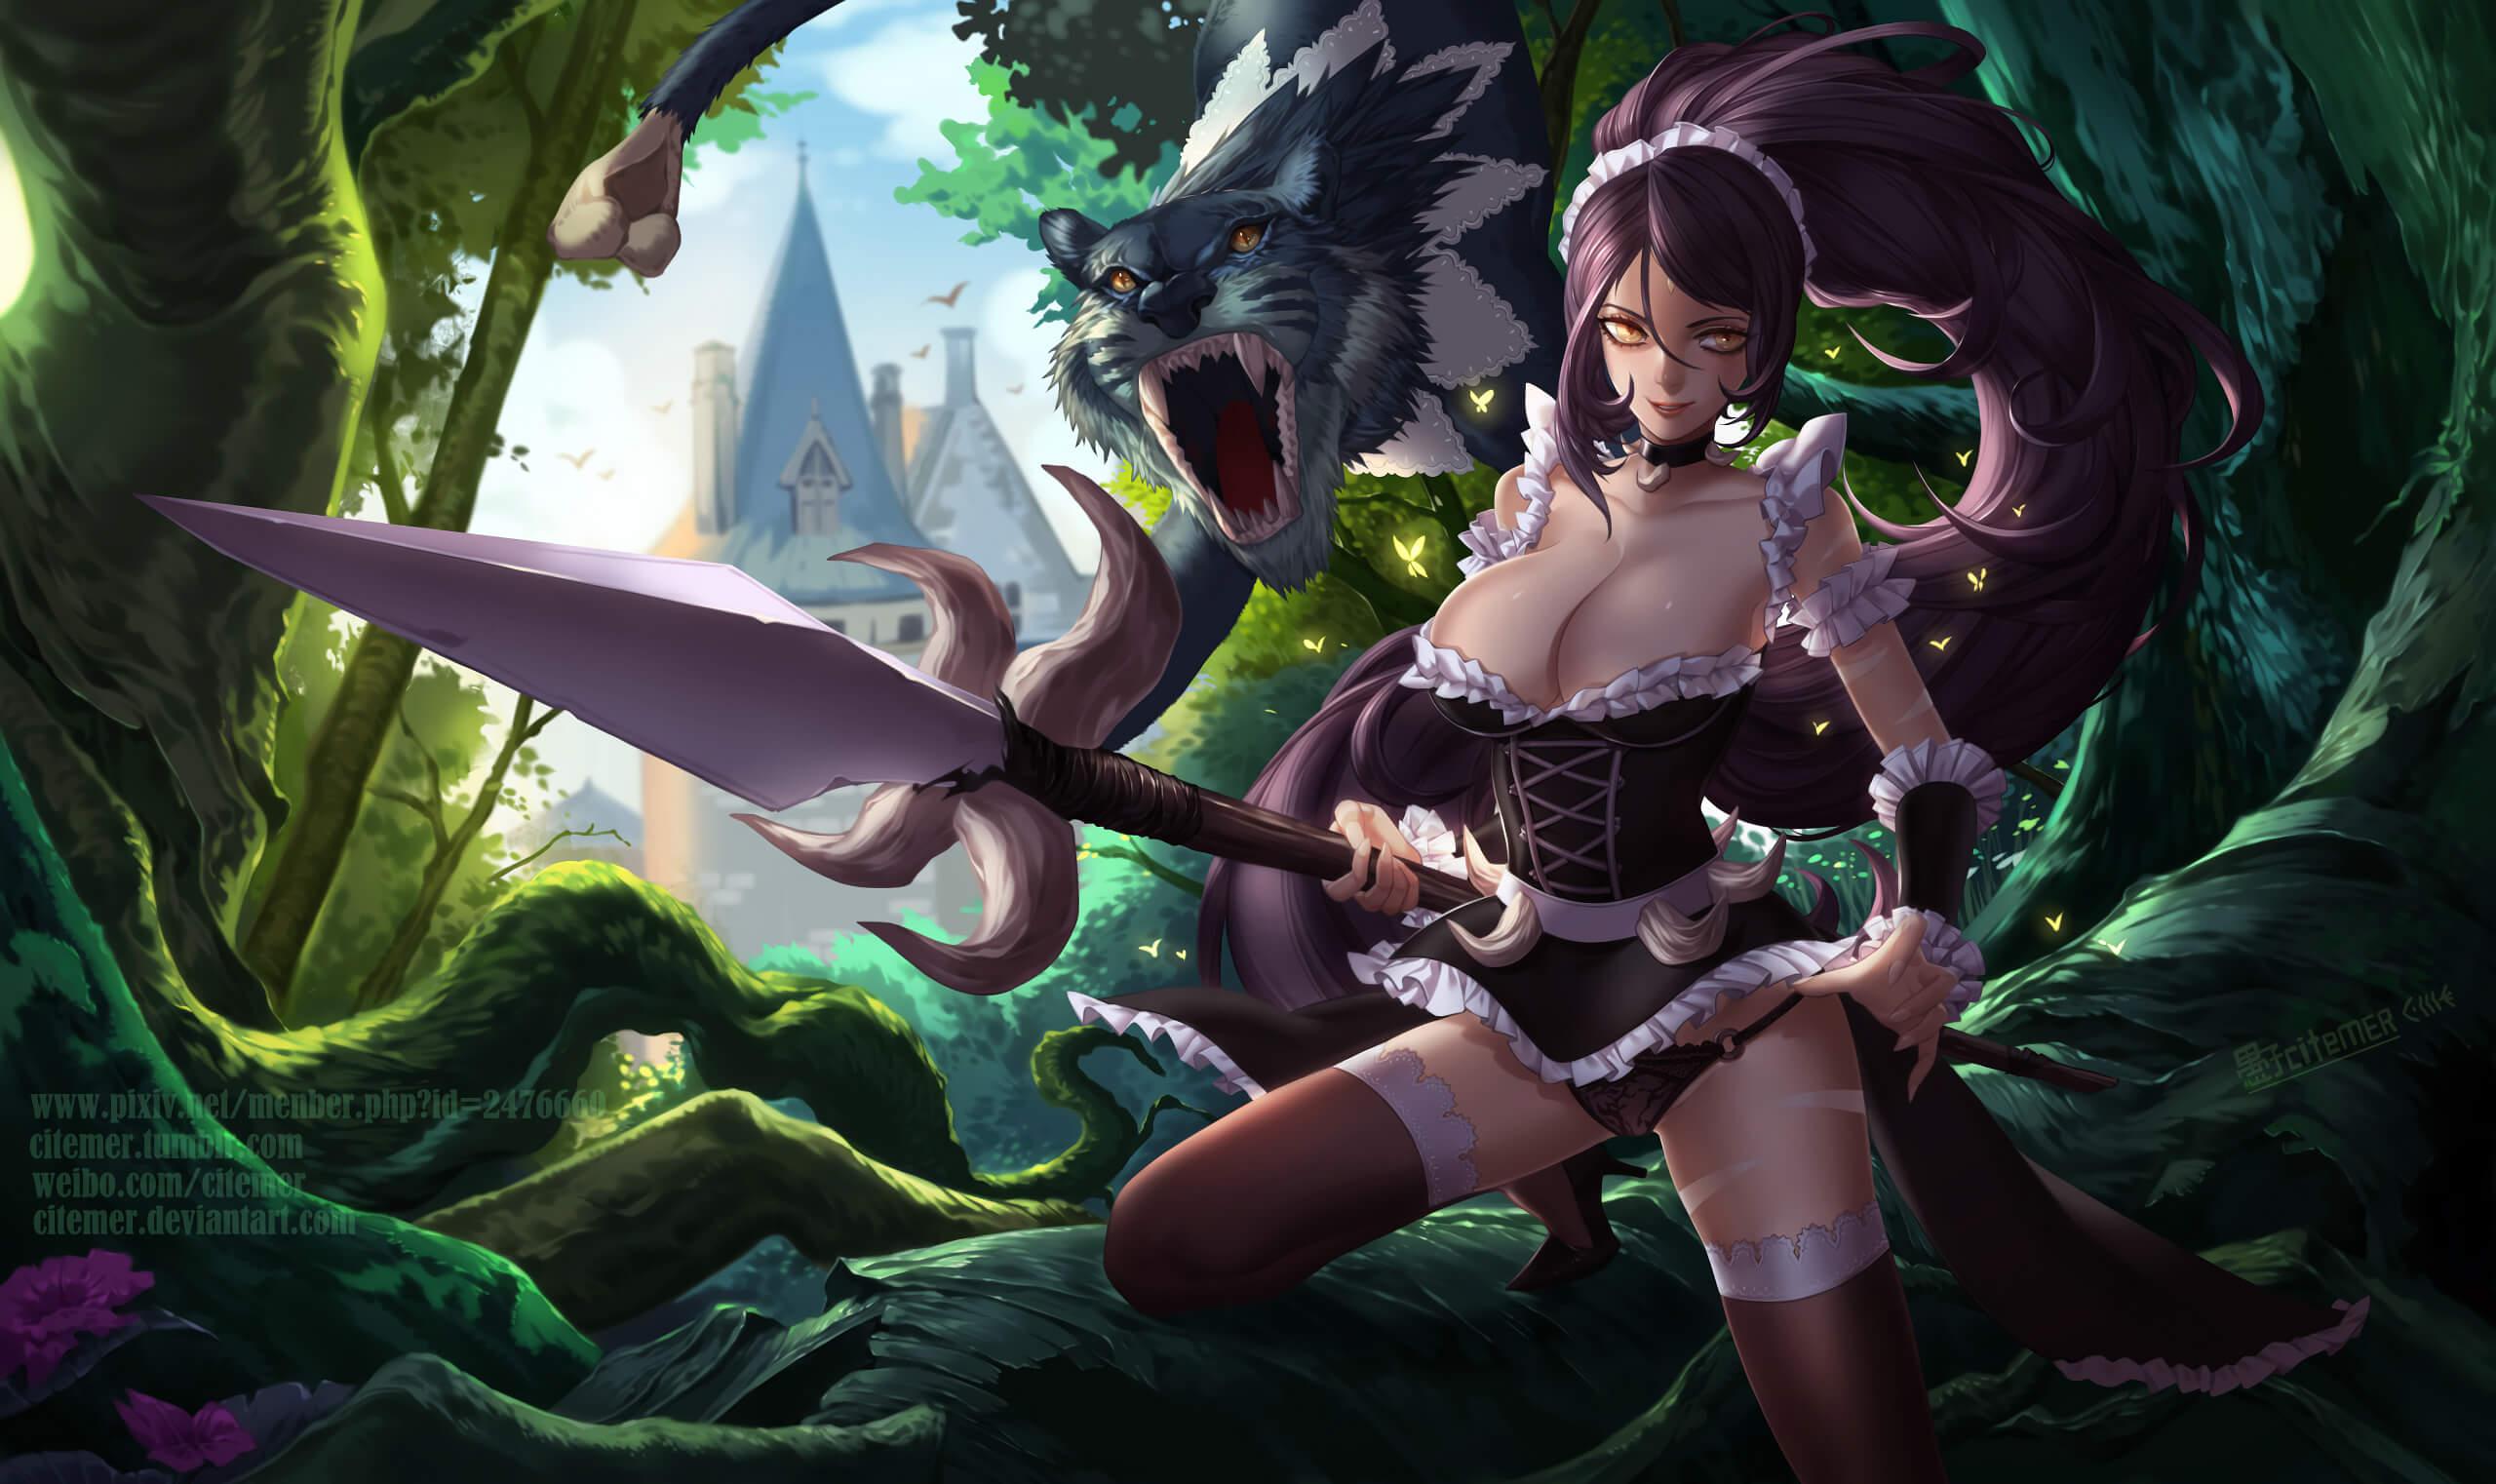 49 Hot Pictures Of French Maid Nidalee From League Of Legends Are Just Too Yum For Her Fans | Best Of Comic Books